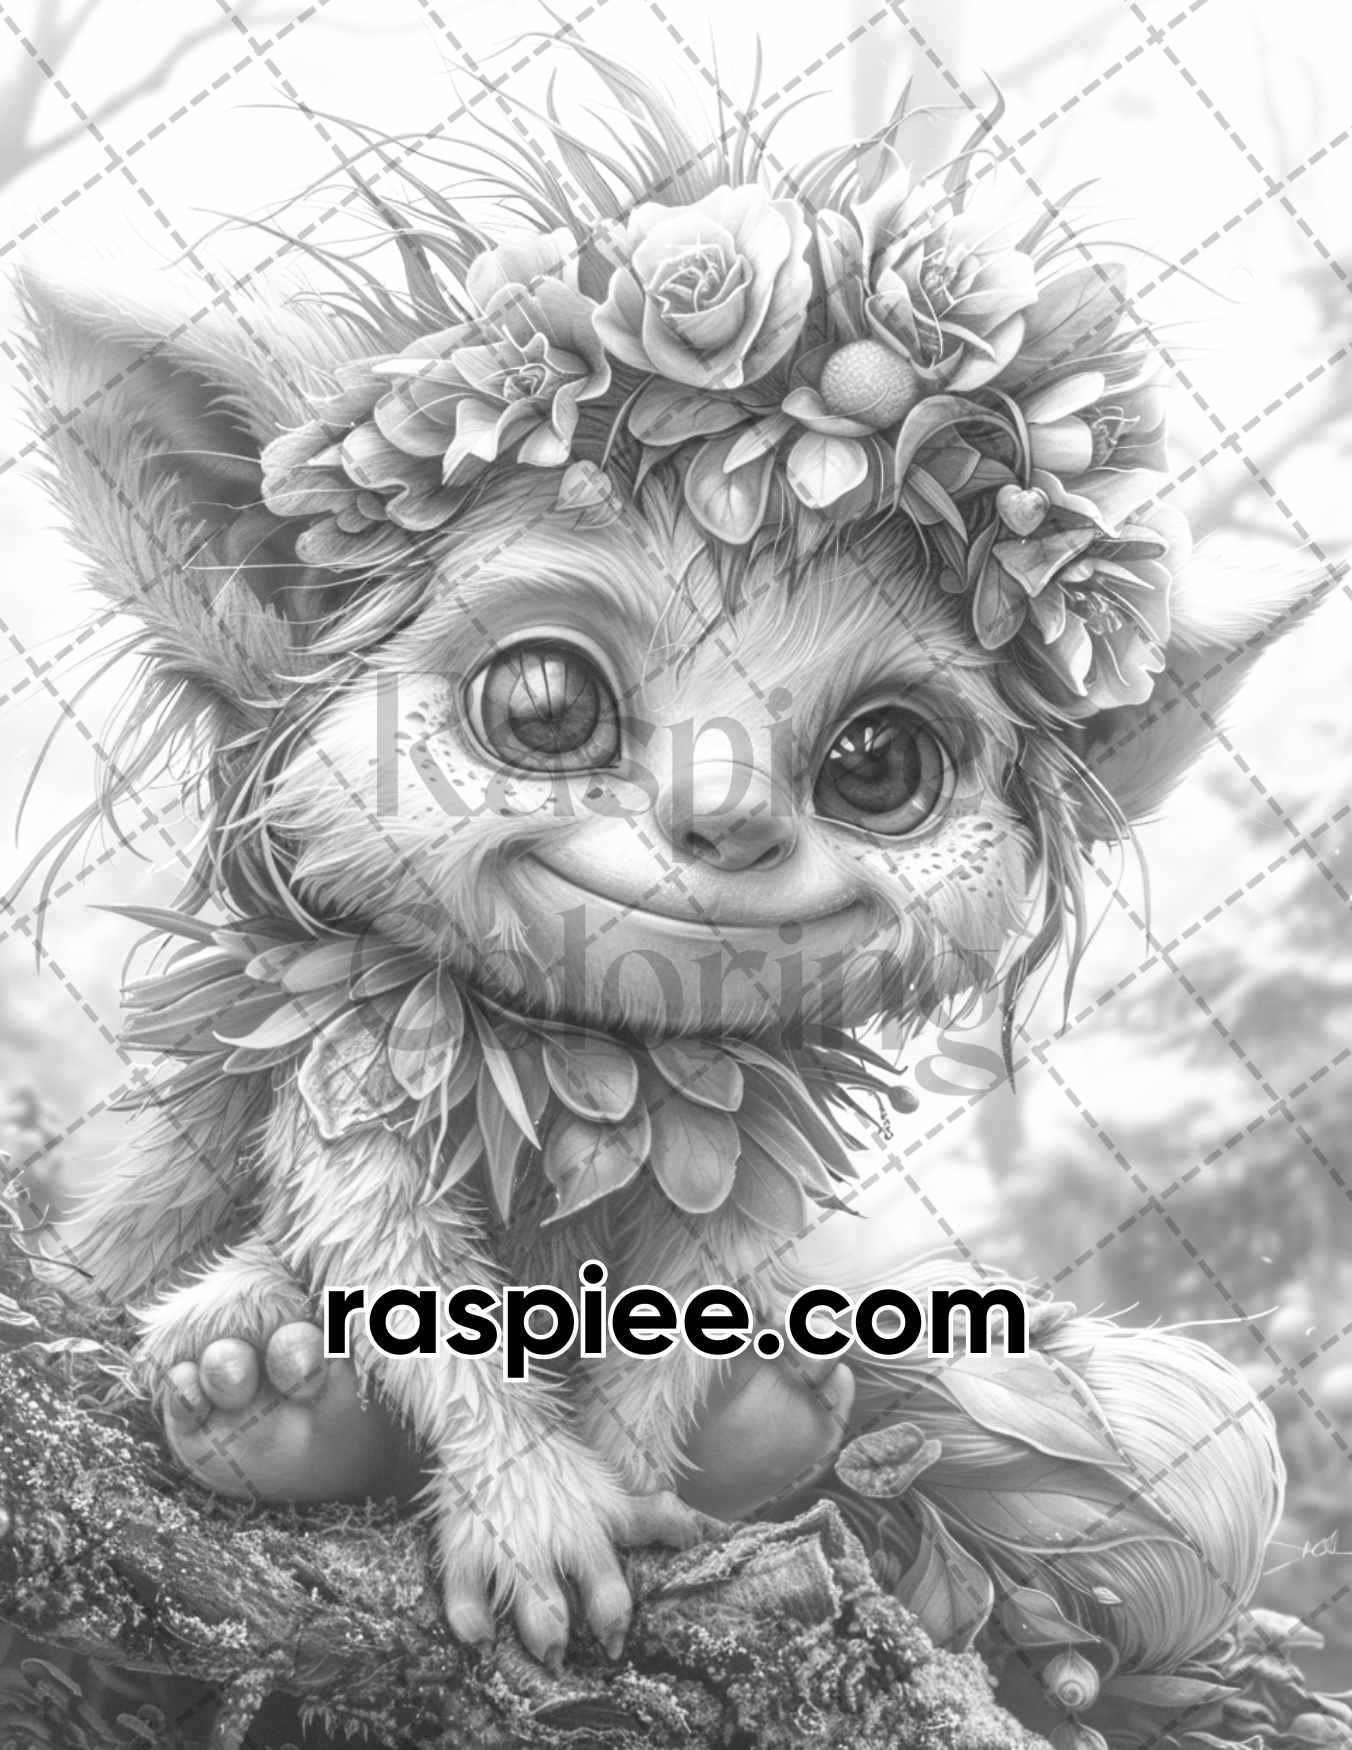 adult coloring pages, adult coloring sheets, adult coloring book pdf, adult coloring book printable, grayscale coloring pages, grayscale coloring books, grayscale illustration, Fantasy Little Trolls Grayscale Adult Coloring Pages